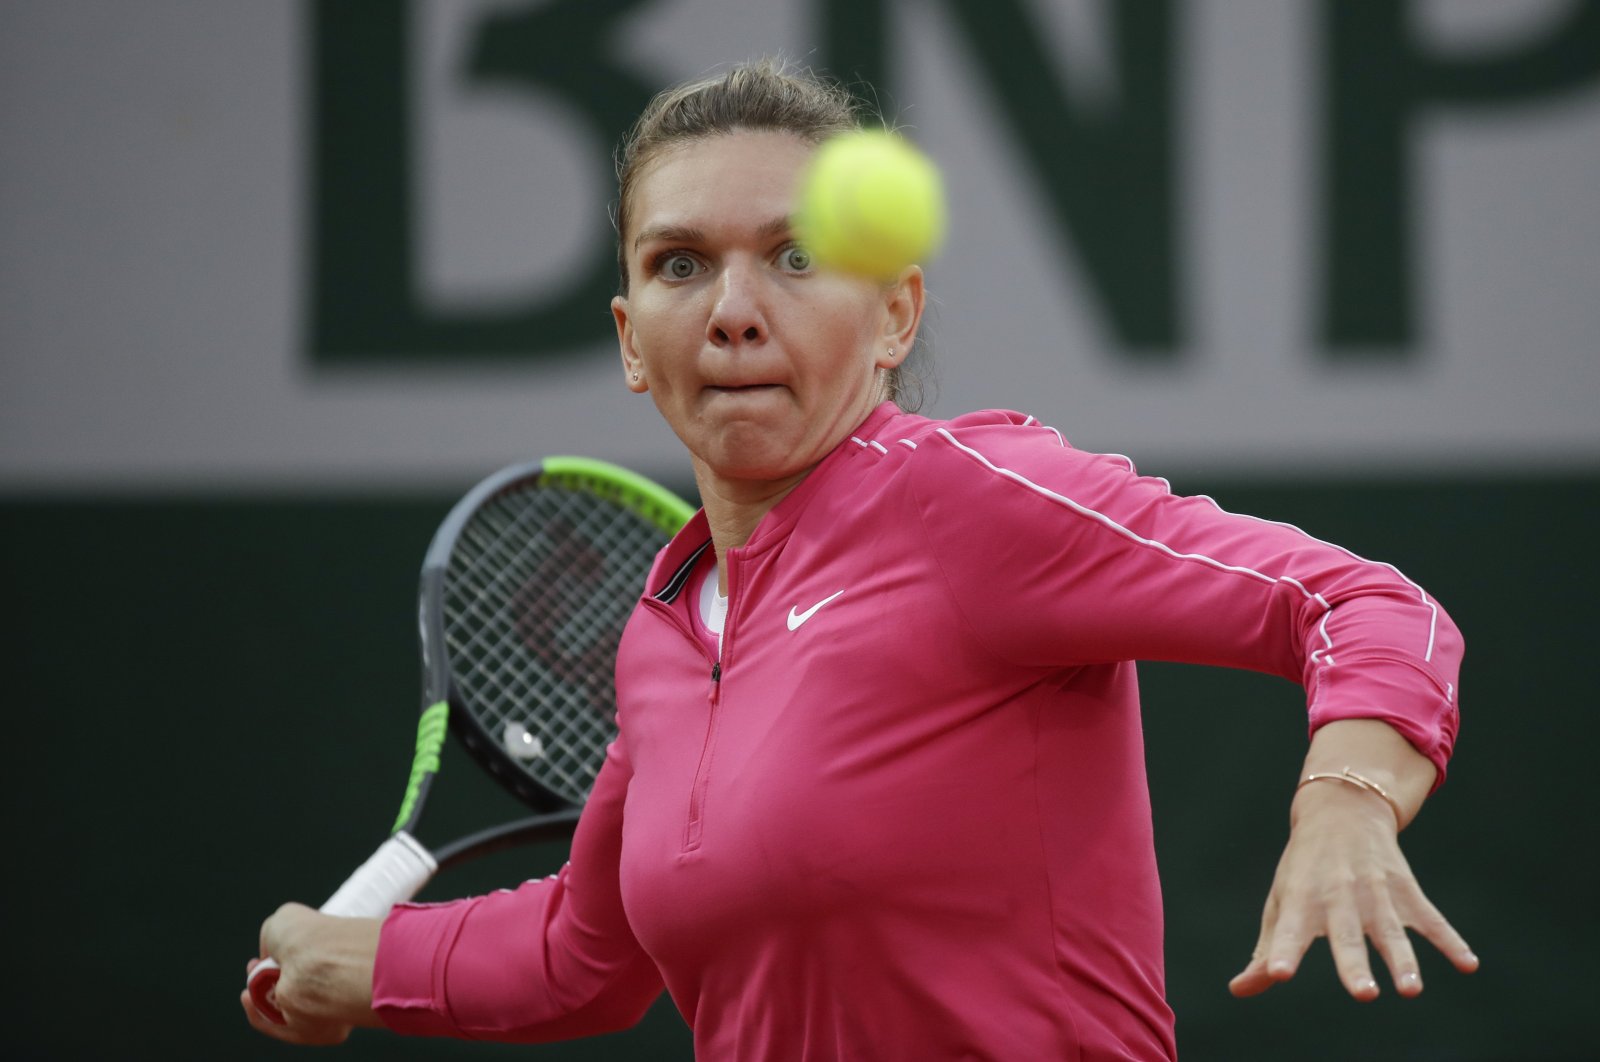 Simona Halep plays a shot against Irina-Camelia Begu during a French Open tennis match, in Paris, France, Sept. 30, 2020. (AP Photo)